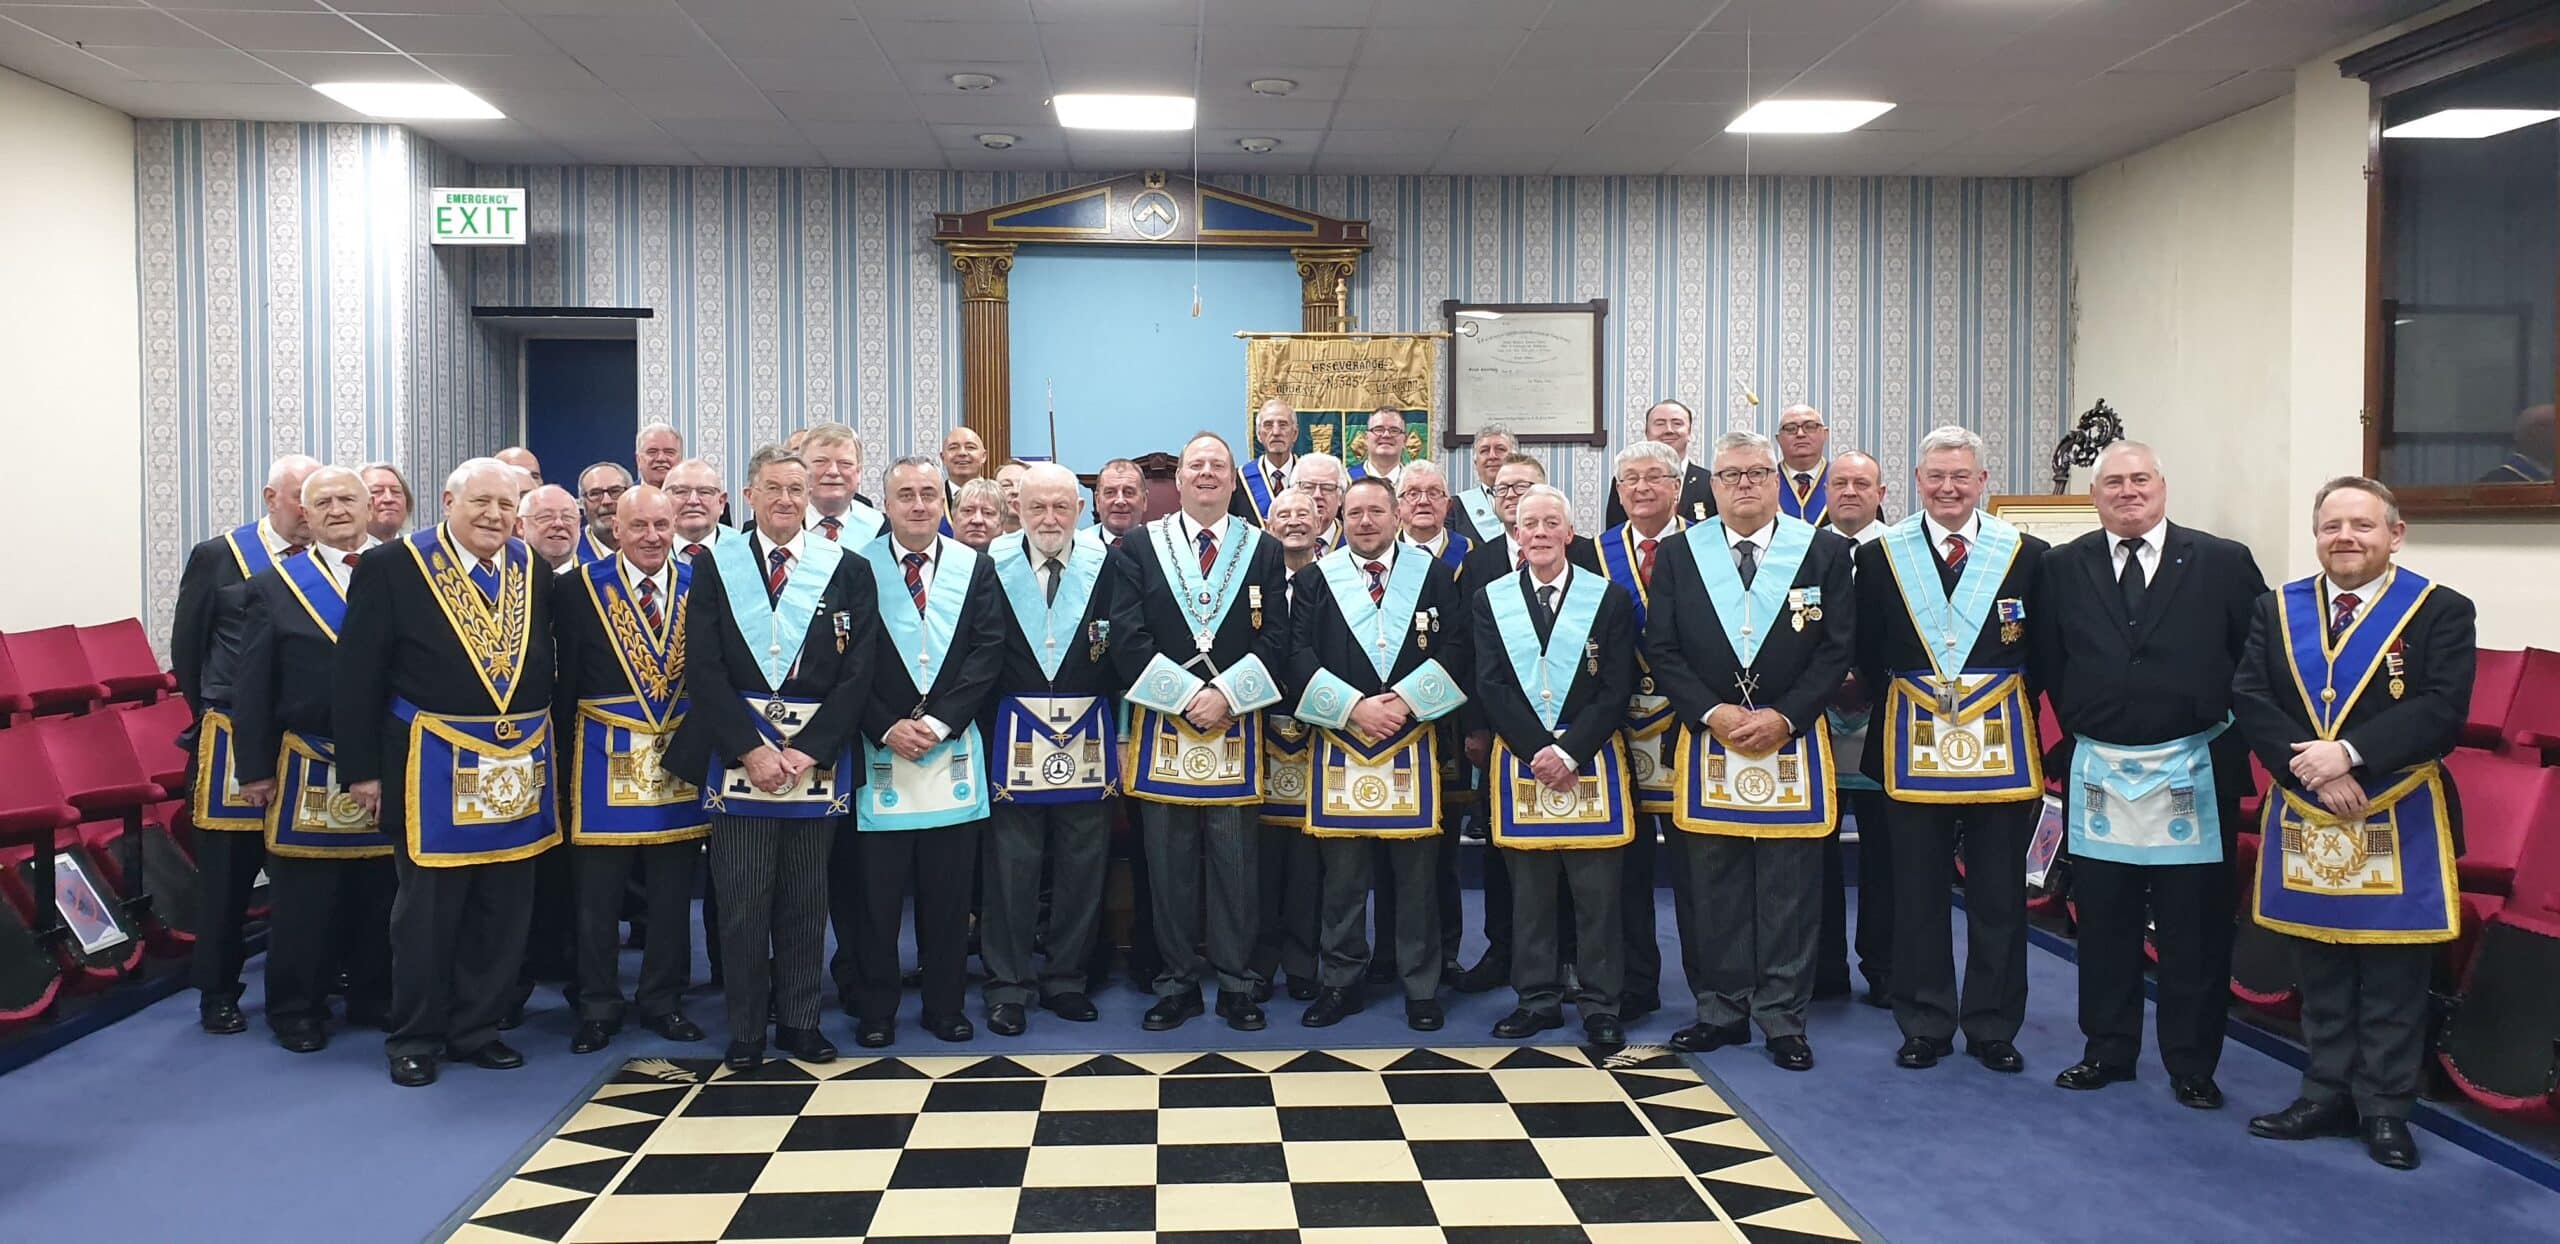 The Lodge of Perseverance 345 Host the Final Meeting at Blackburn MH